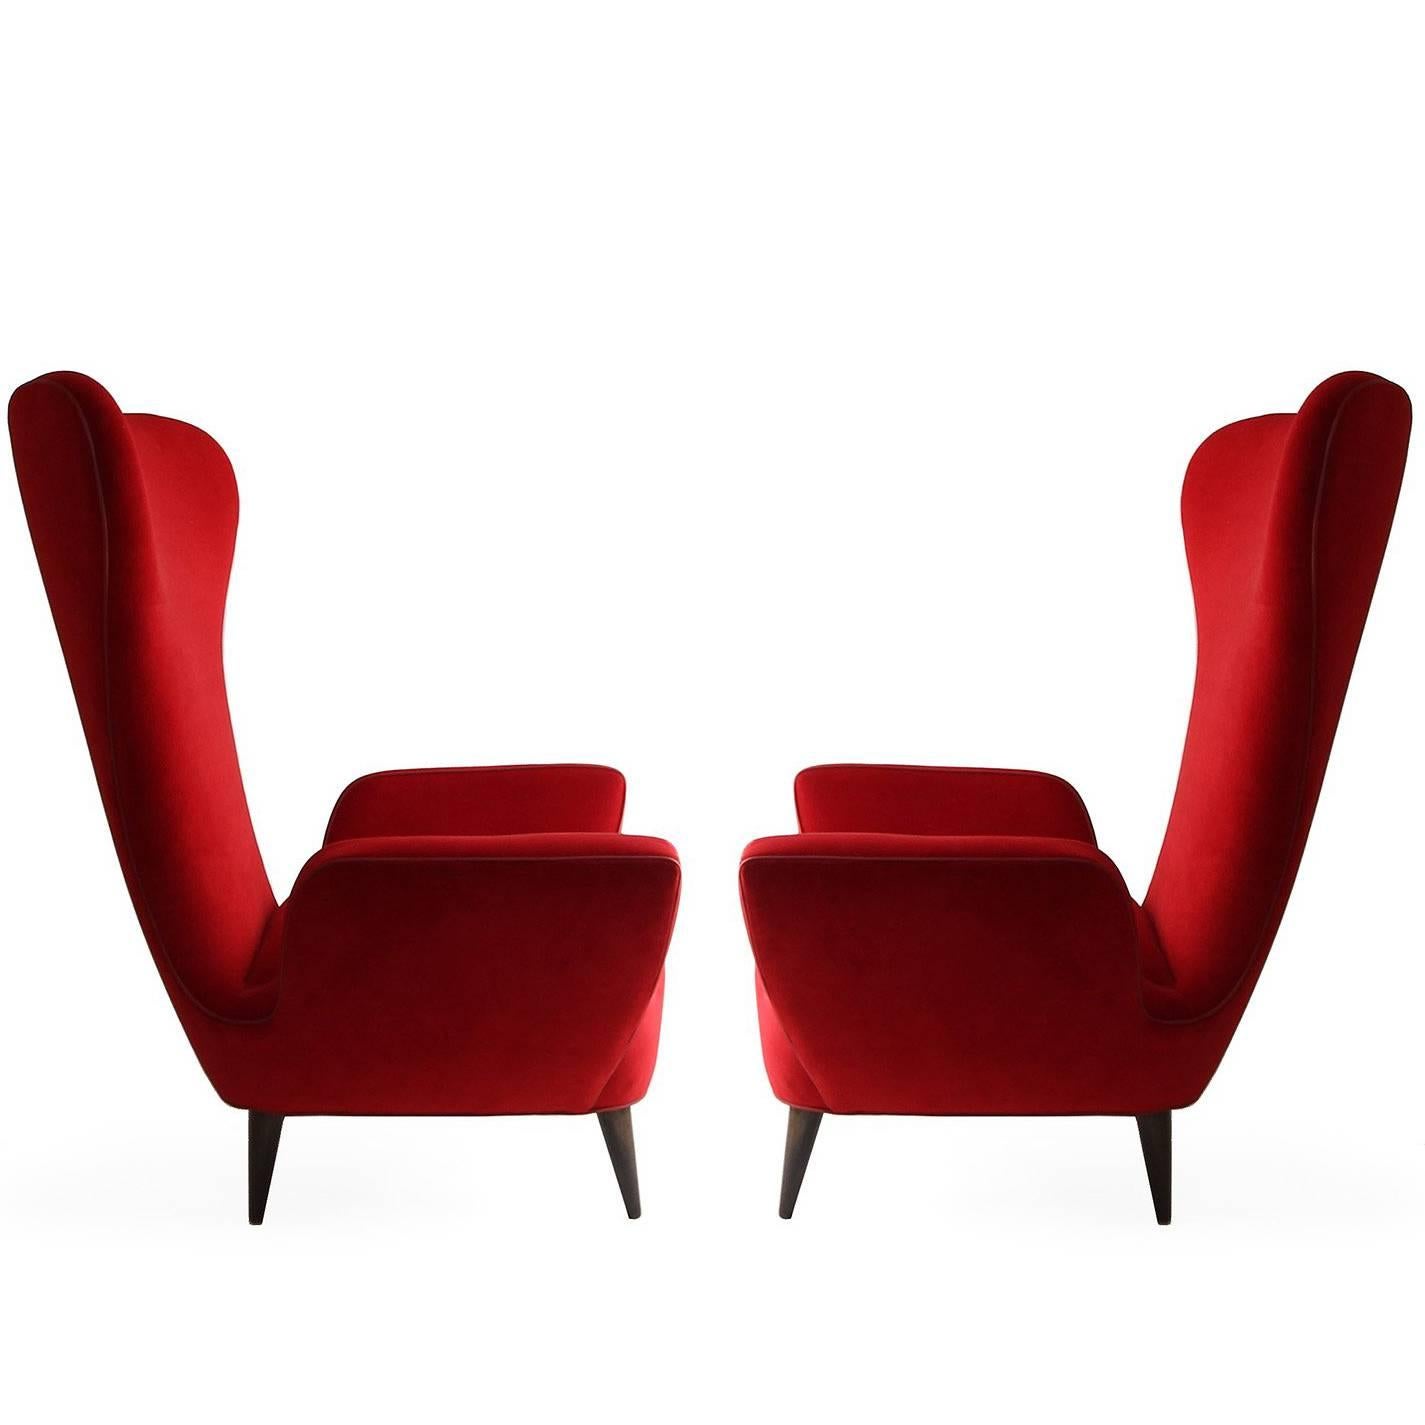 Pair of Rare Low-Slung Modern Italian Sculptural Chairs For Sale